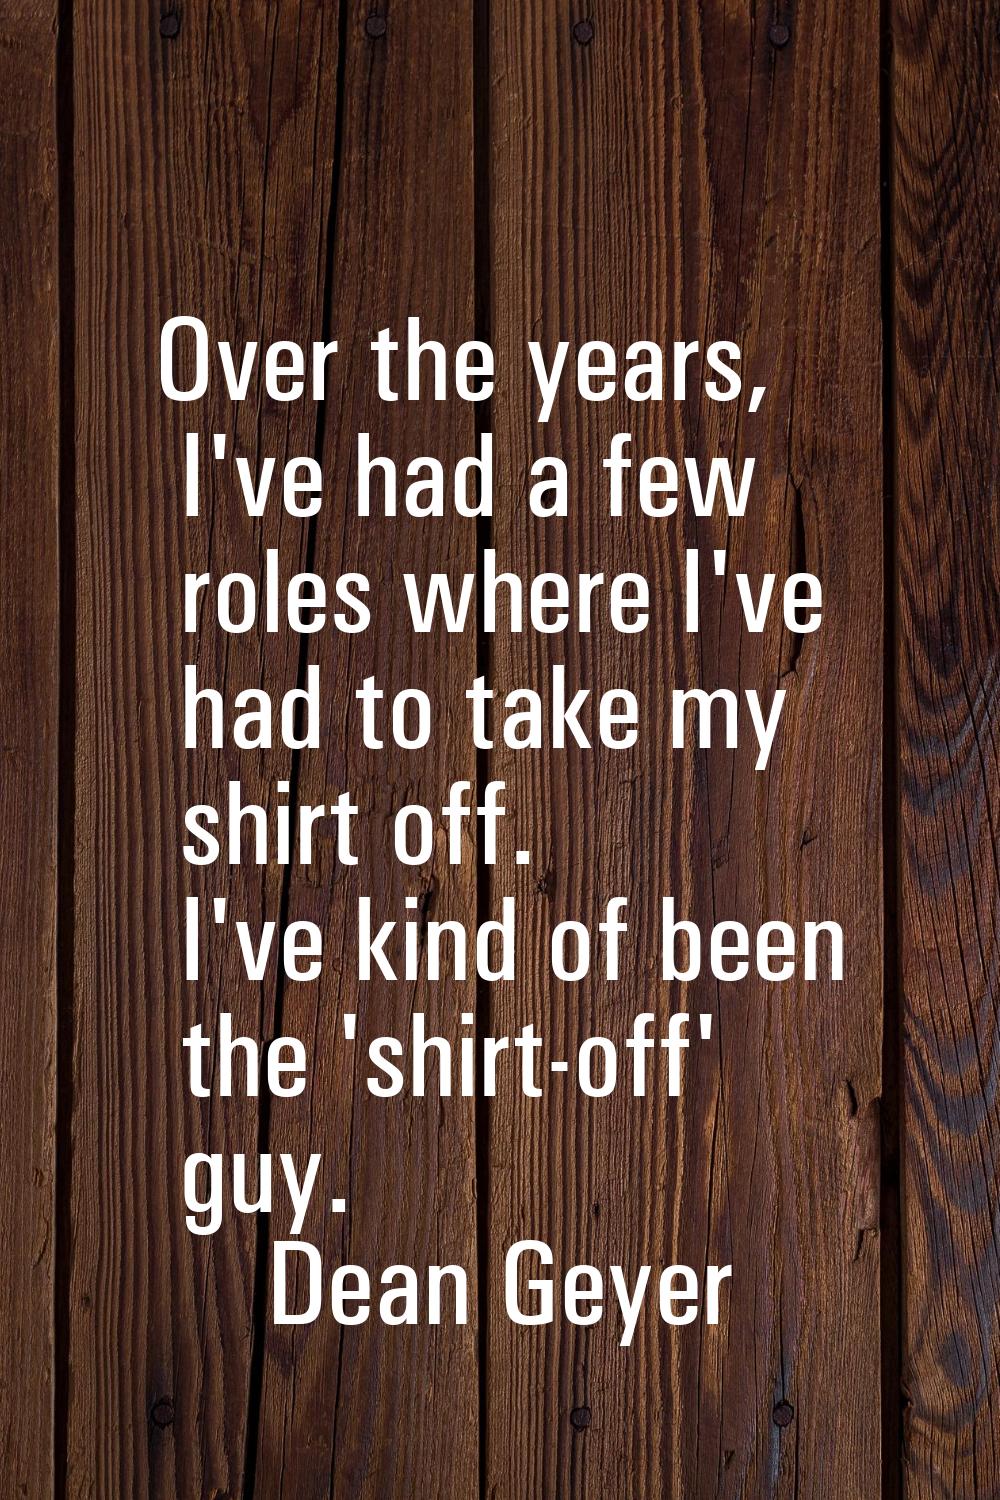 Over the years, I've had a few roles where I've had to take my shirt off. I've kind of been the 'sh